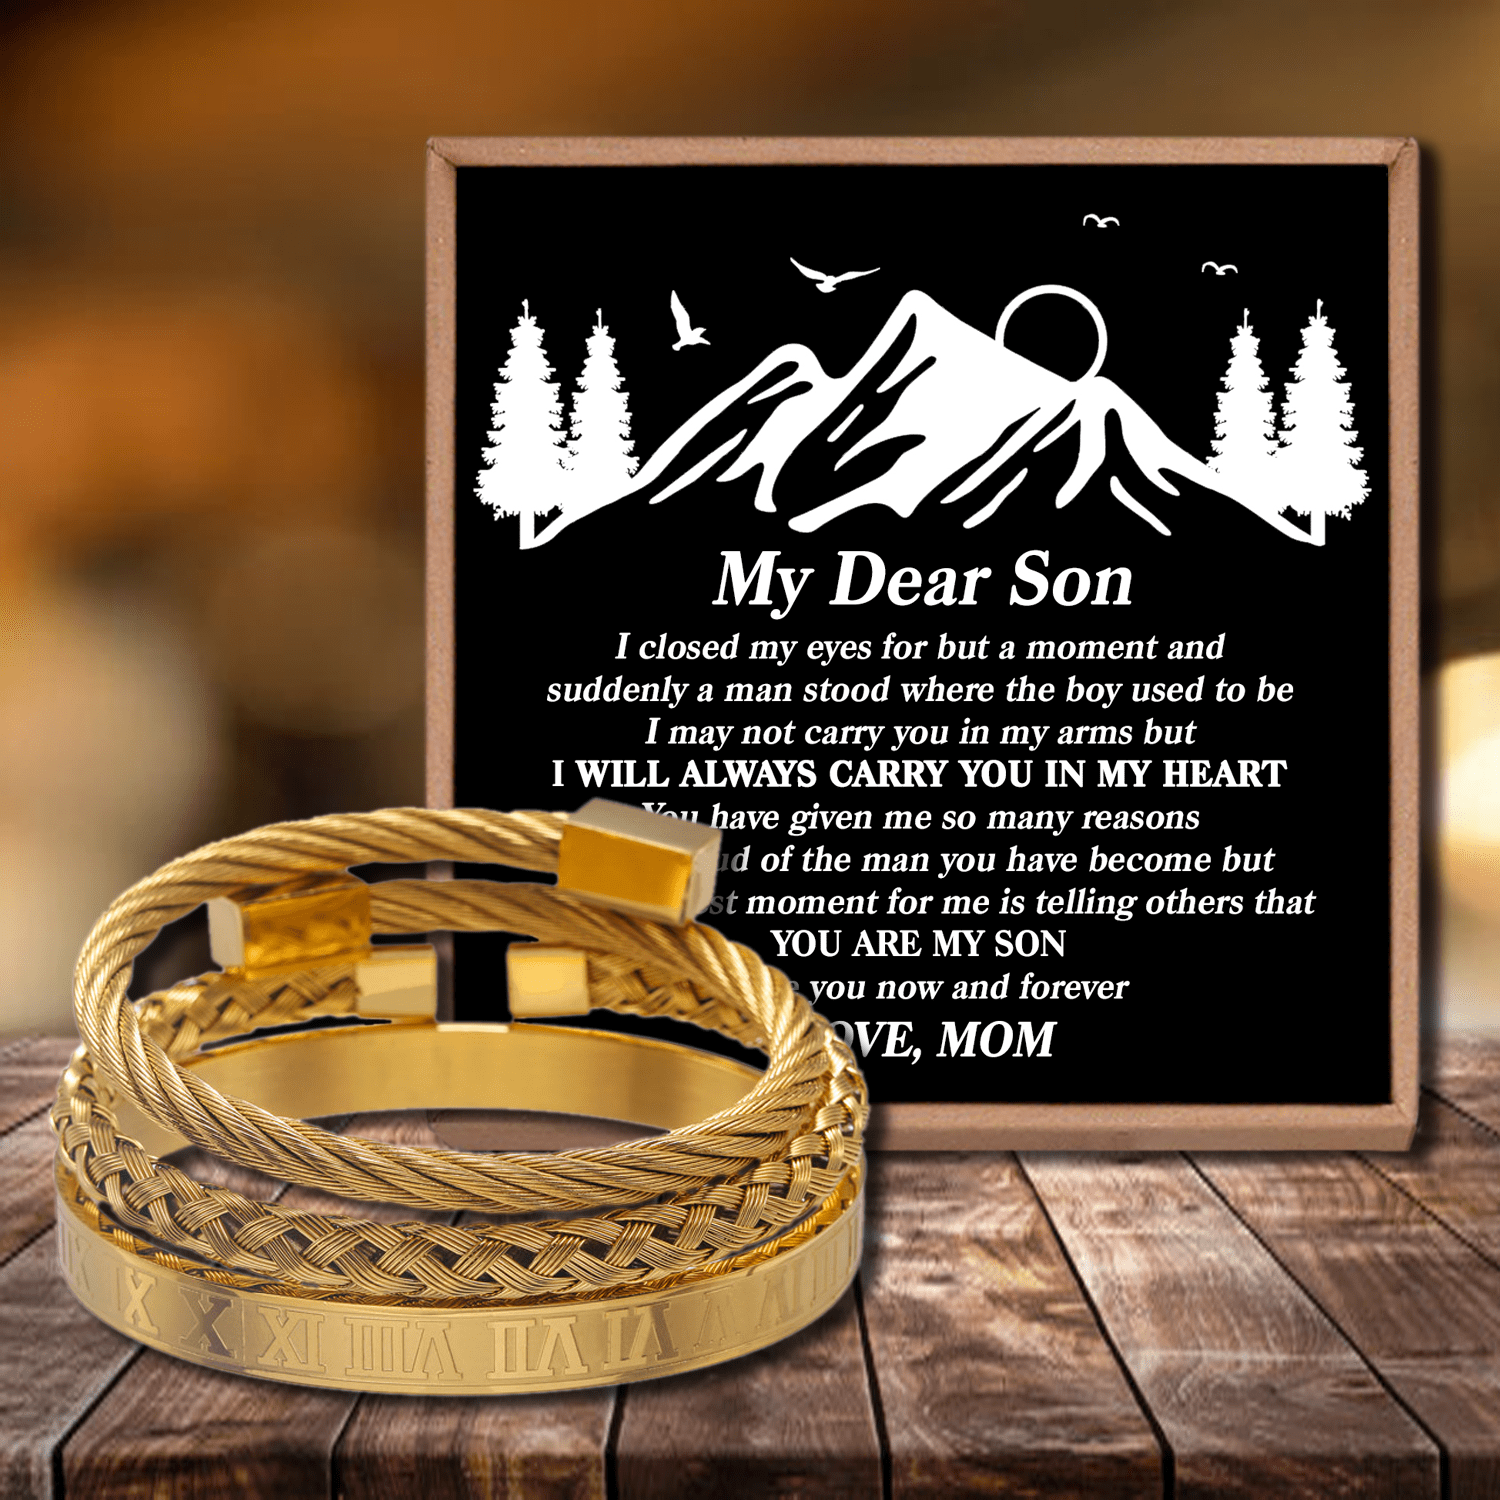 Bracelets Mom To Son - I Will Always Carry You Roman Numeral Bracelet Set Gold GiveMe-Gifts